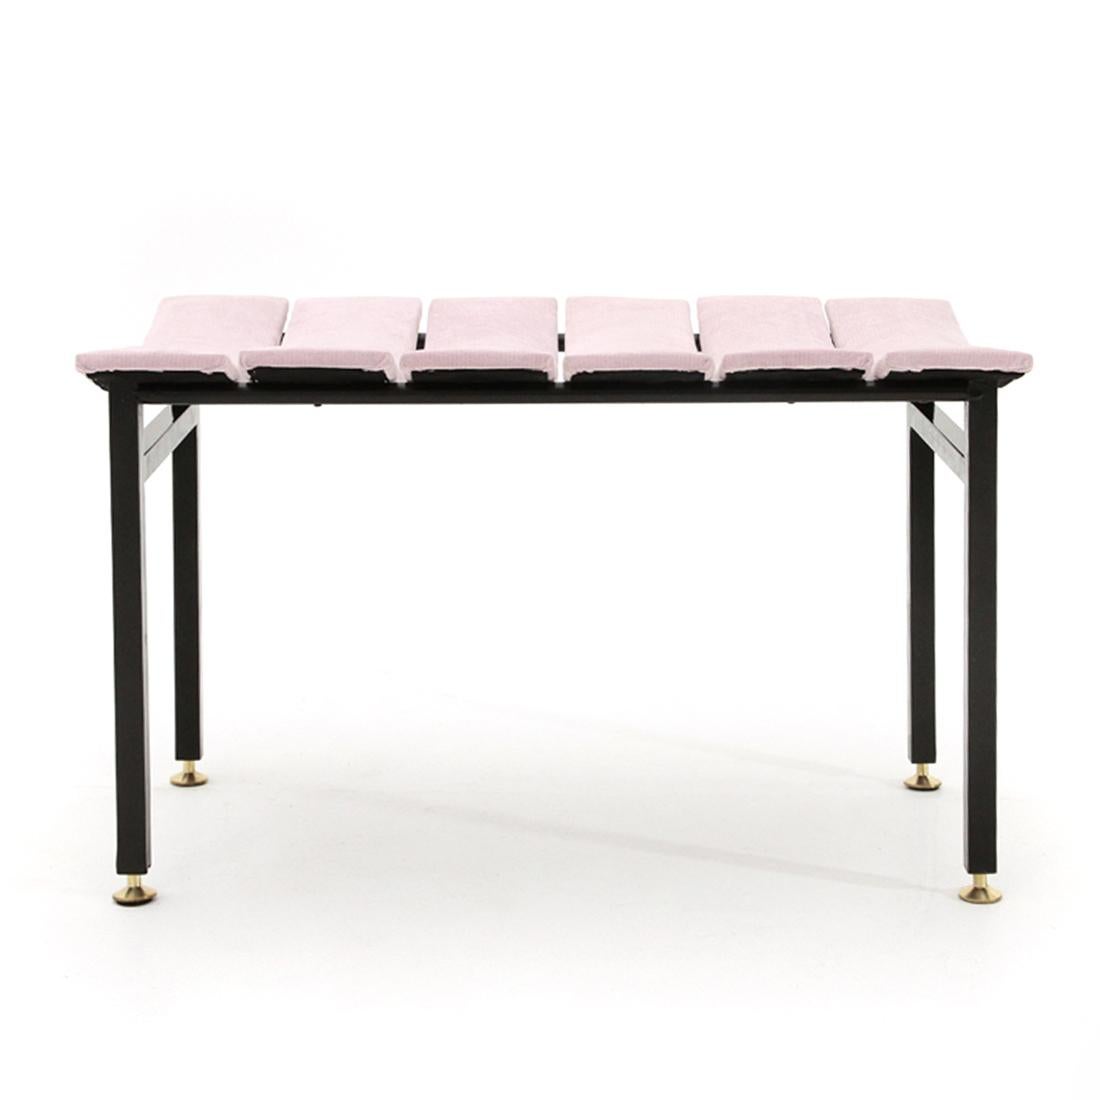 Bench of Italian manufacture produced in the 1950s.
Structure in black painted metal, brass feet adjustable in height.
Seat made up of curved wooden slats lined in pink velvet.
Good general conditions.

Dimensions: Length 64 cm, depth 37 cm,